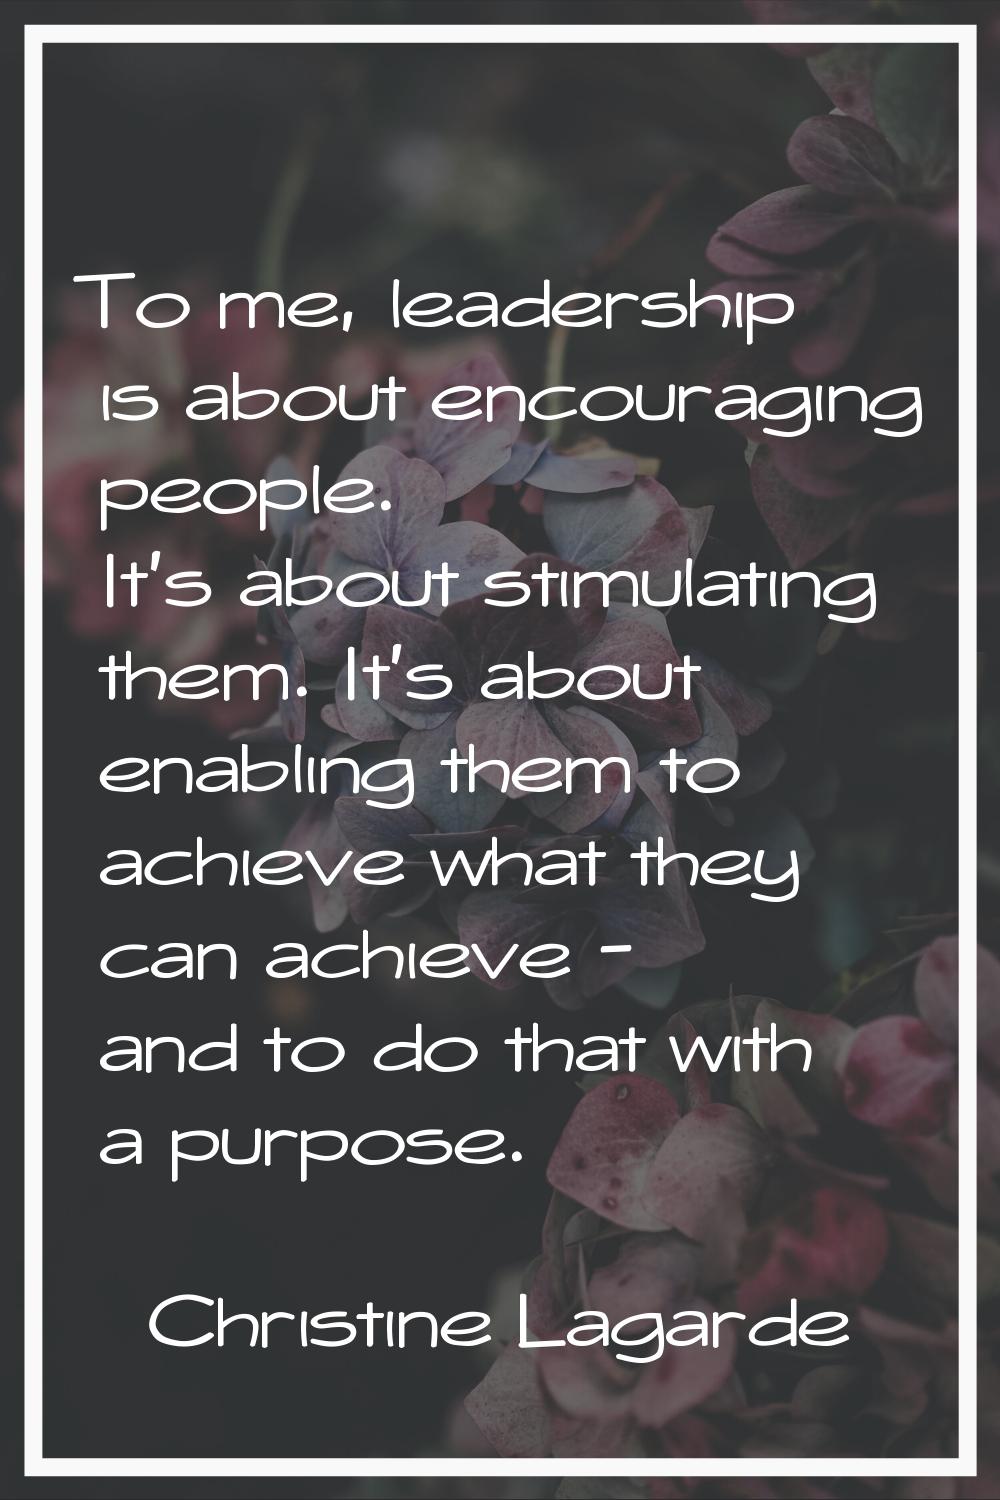 To me, leadership is about encouraging people. It's about stimulating them. It's about enabling the